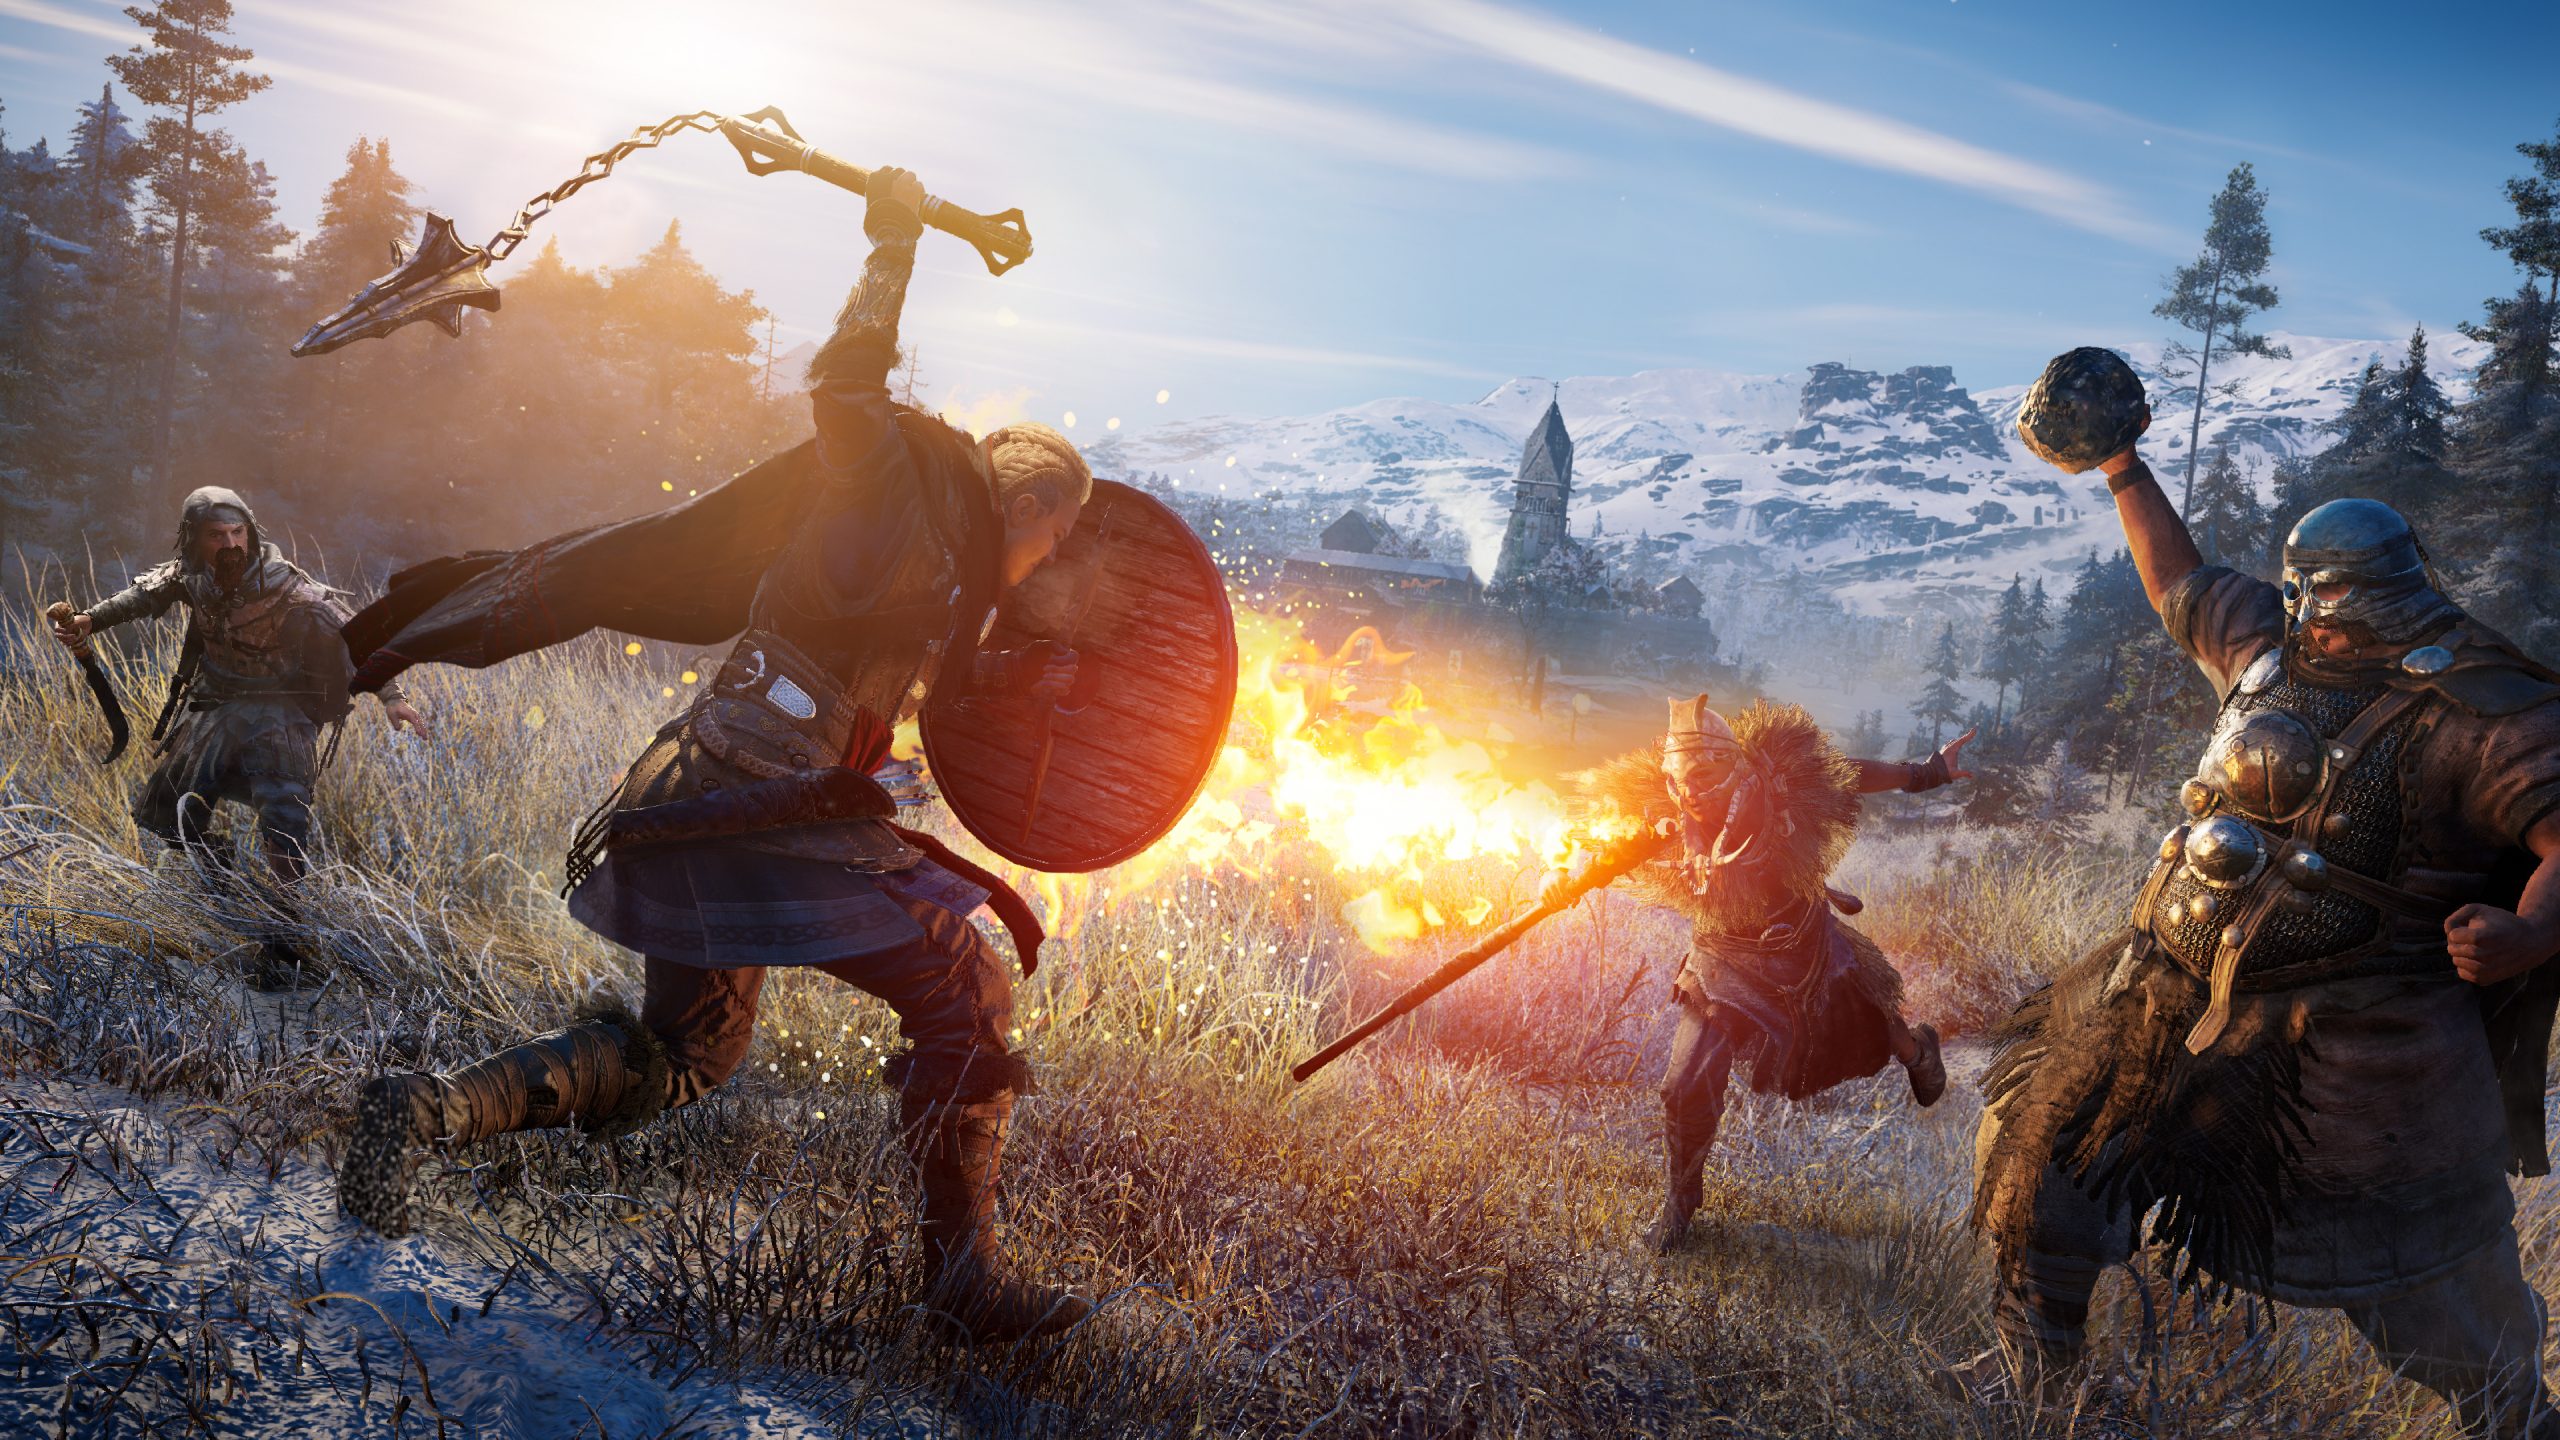 New Video Confirms That Assassin’s Creed Valhalla Will Perform Best On Xbox One